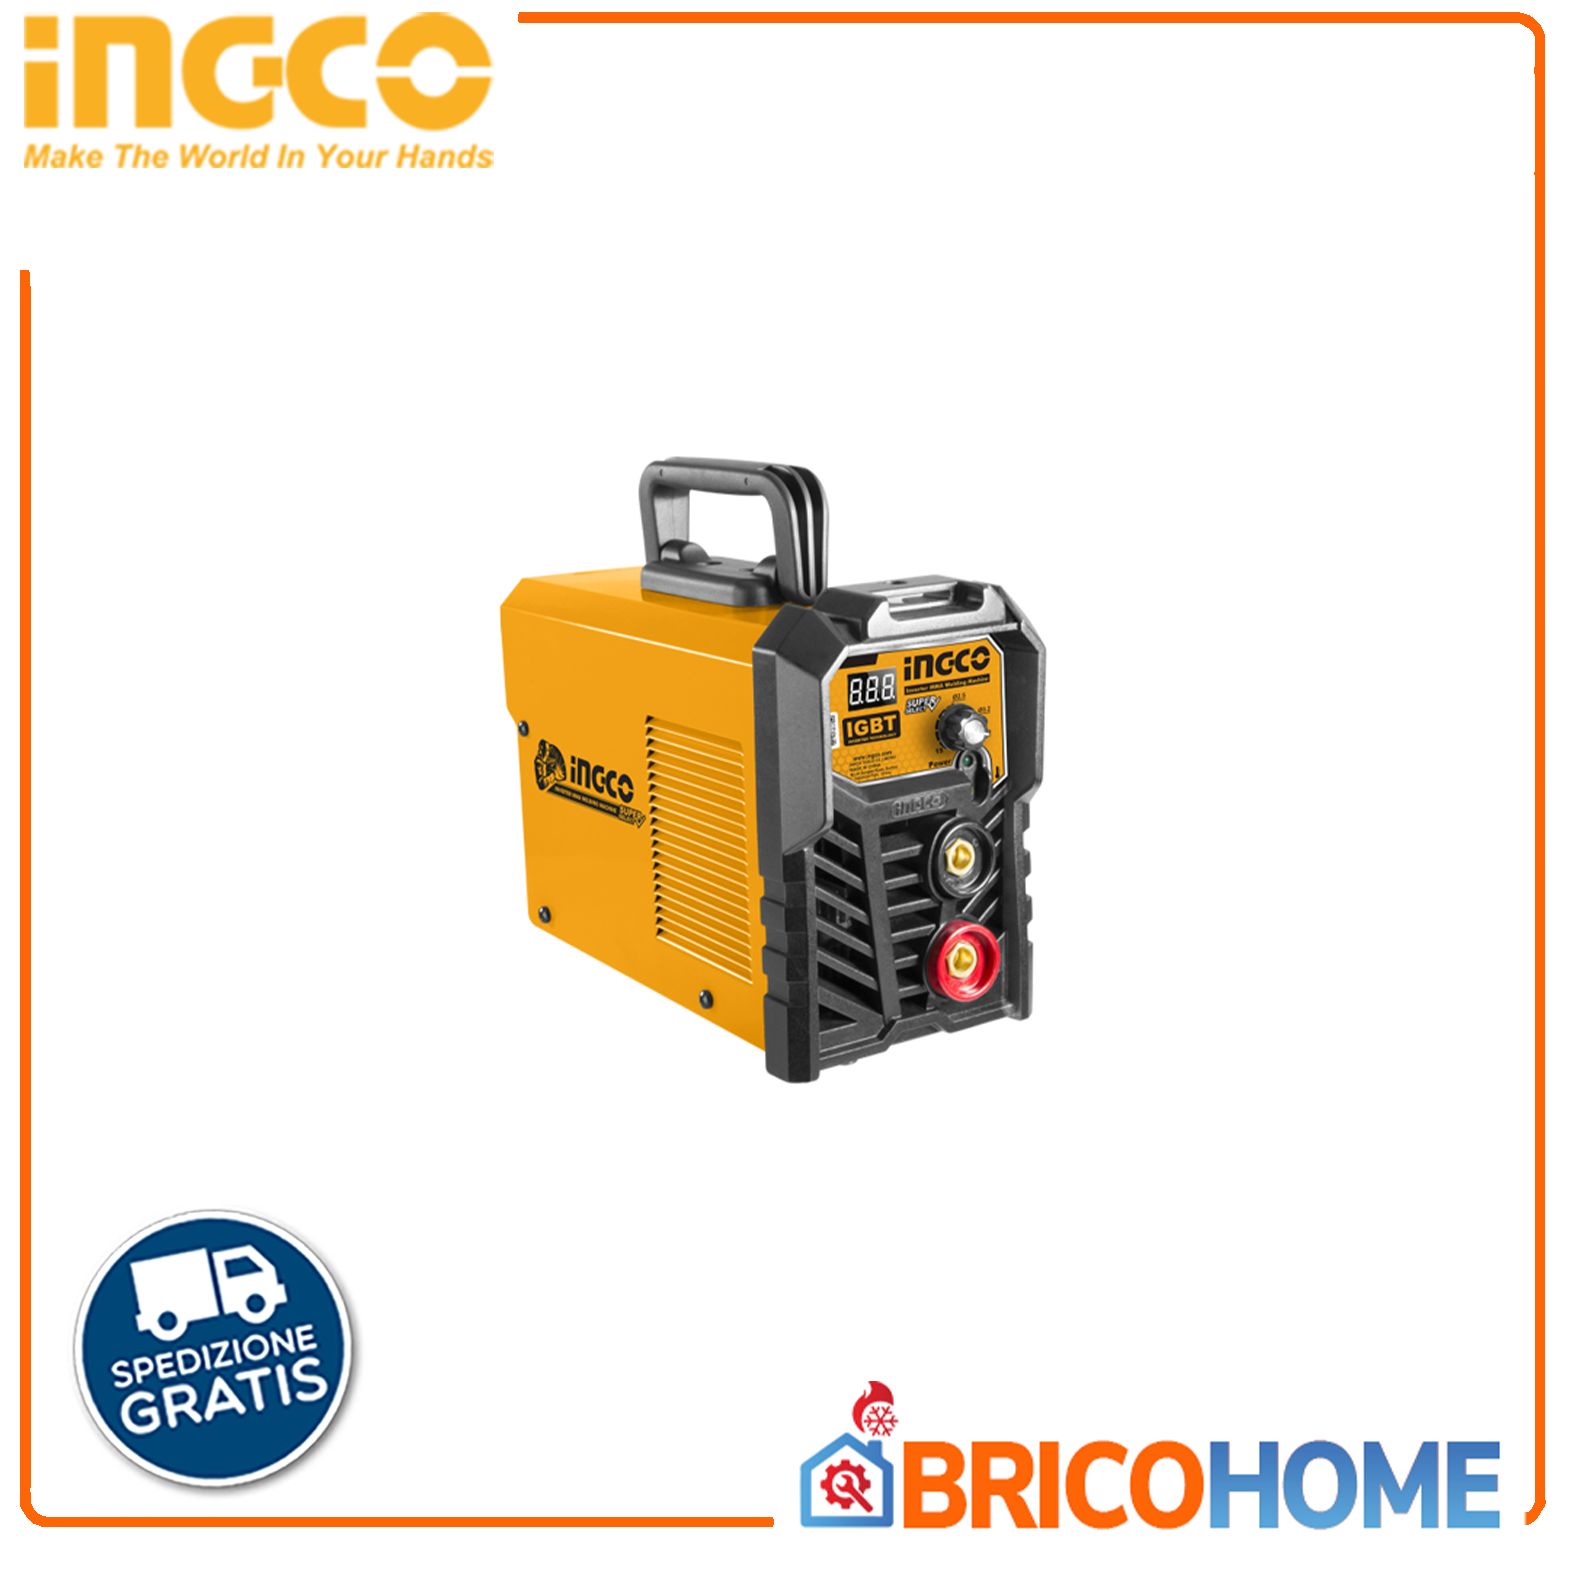 MMA 160A invert welding machine with INGCO accessories